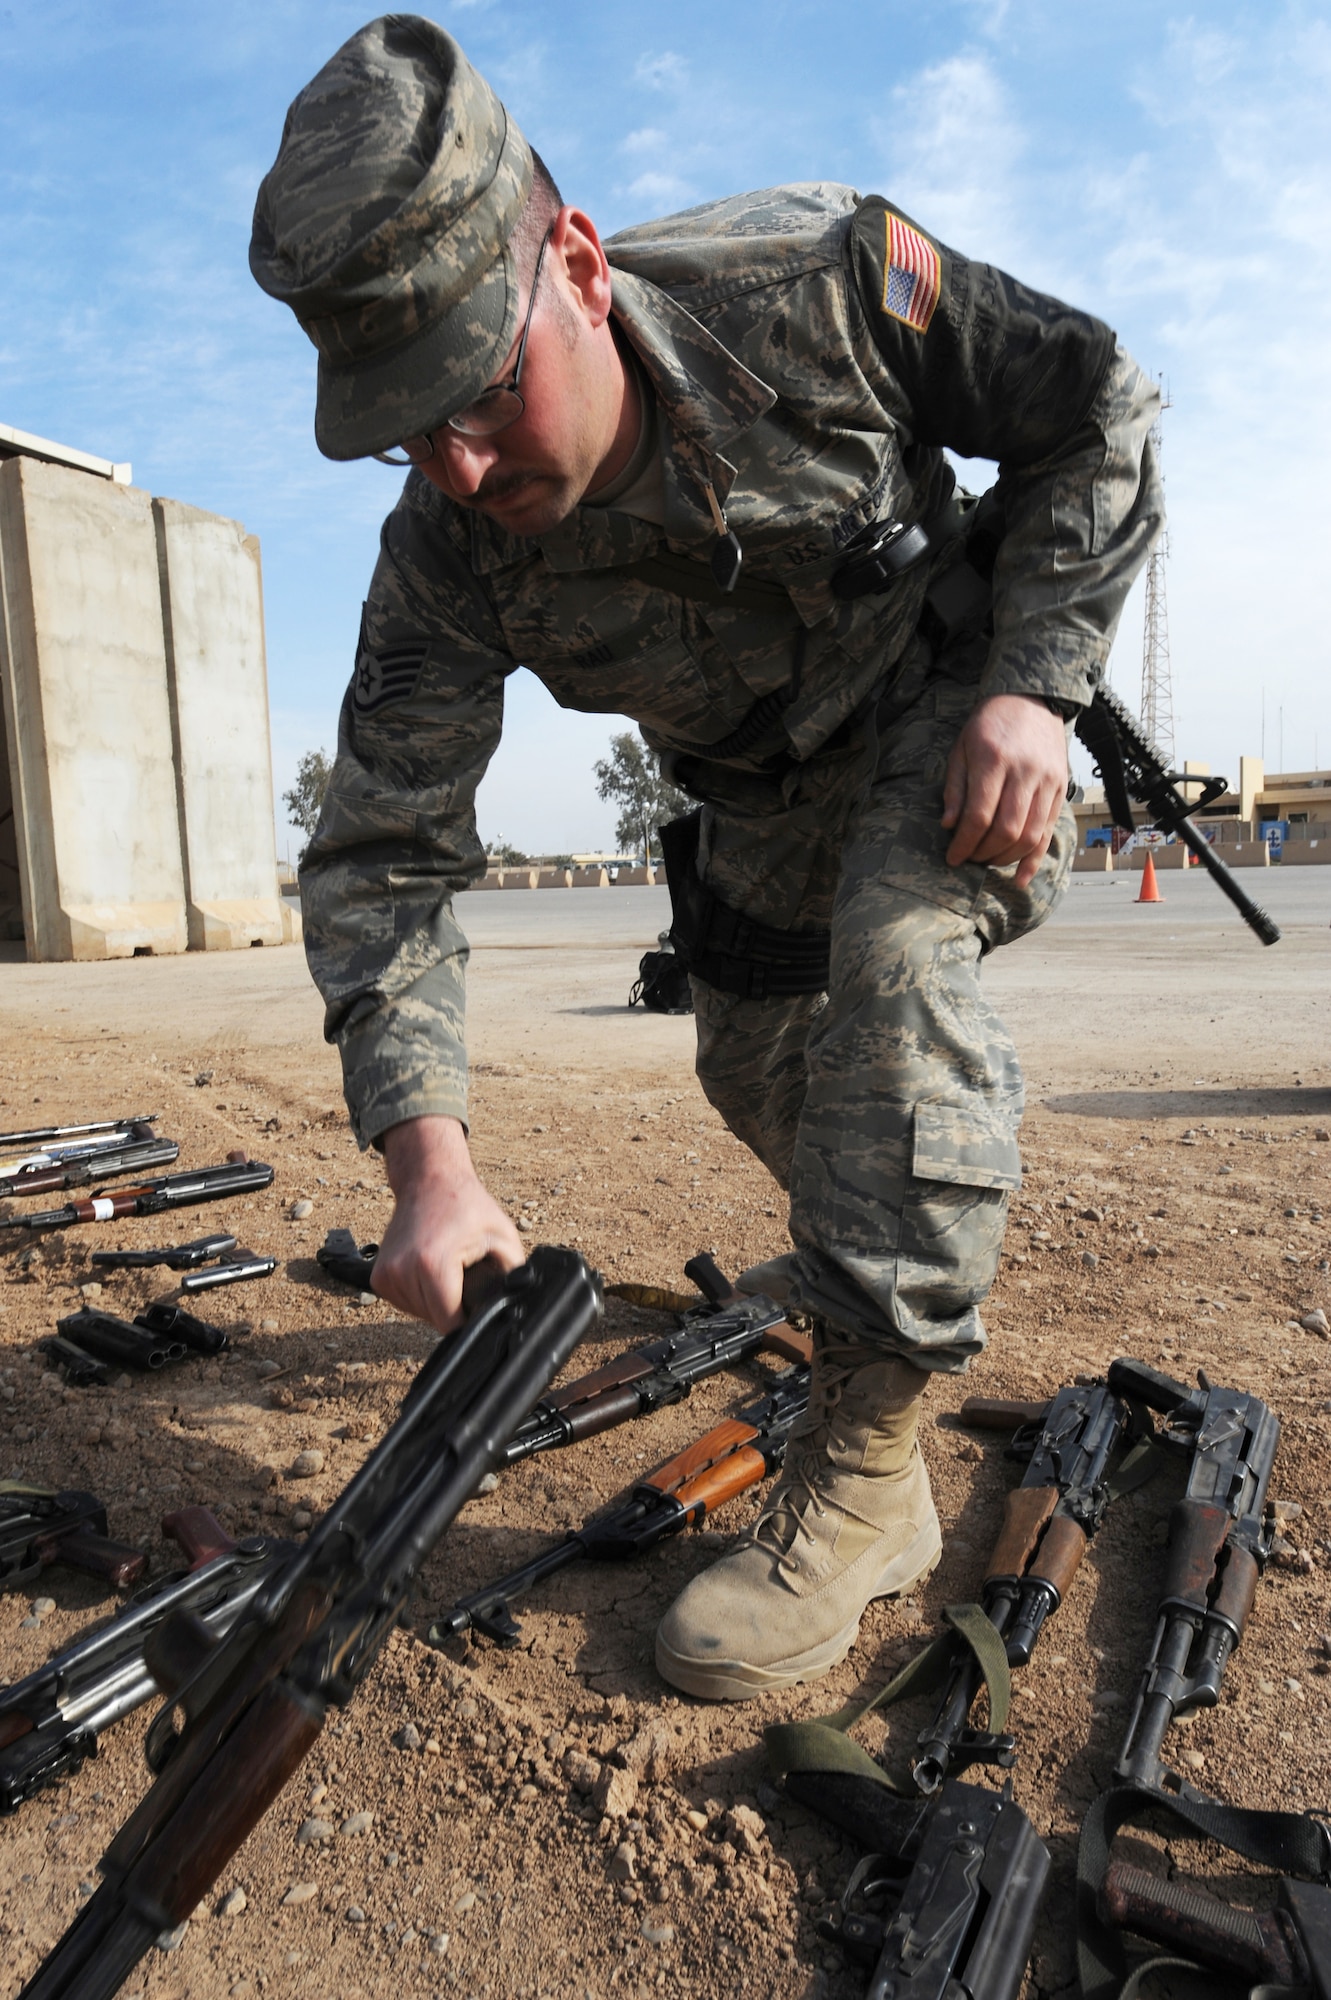 Staff Sgt. Richard Rau clears enemy weapons that have been laid out and marked for destruction at Joint Base Balad, Iraq, March 18. The various weapons were collected over time from amnesty boxes and units to enhance base security and force protection. Sergeant Rau is a 332nd Expeditionary Security Forces Squadron patrolman. (U.S. Air Force photo/Senior Airman Elizabeth Rissmiller)